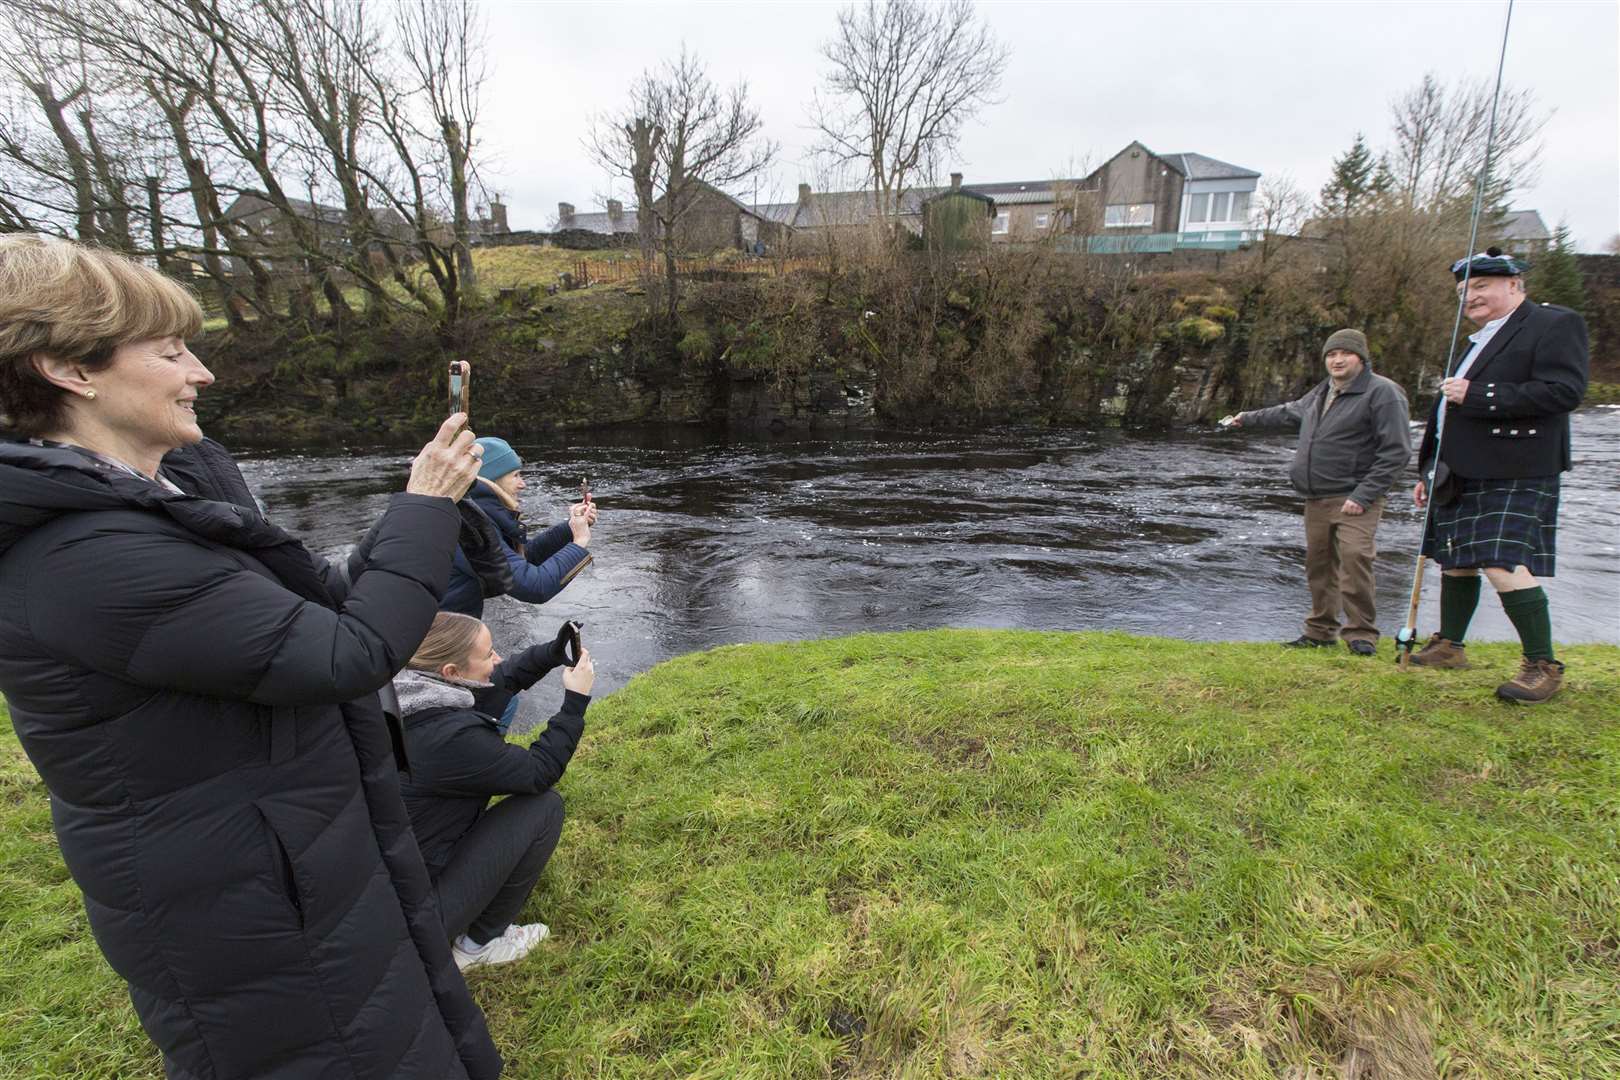 One for the family album: Linda Graham takes a snapshot of her husband John, who cast the first fly, and senior ghillie Geordie Doull, who gave the toast to the River Thurso. Picture: Robert MacDonald / Northern Studios